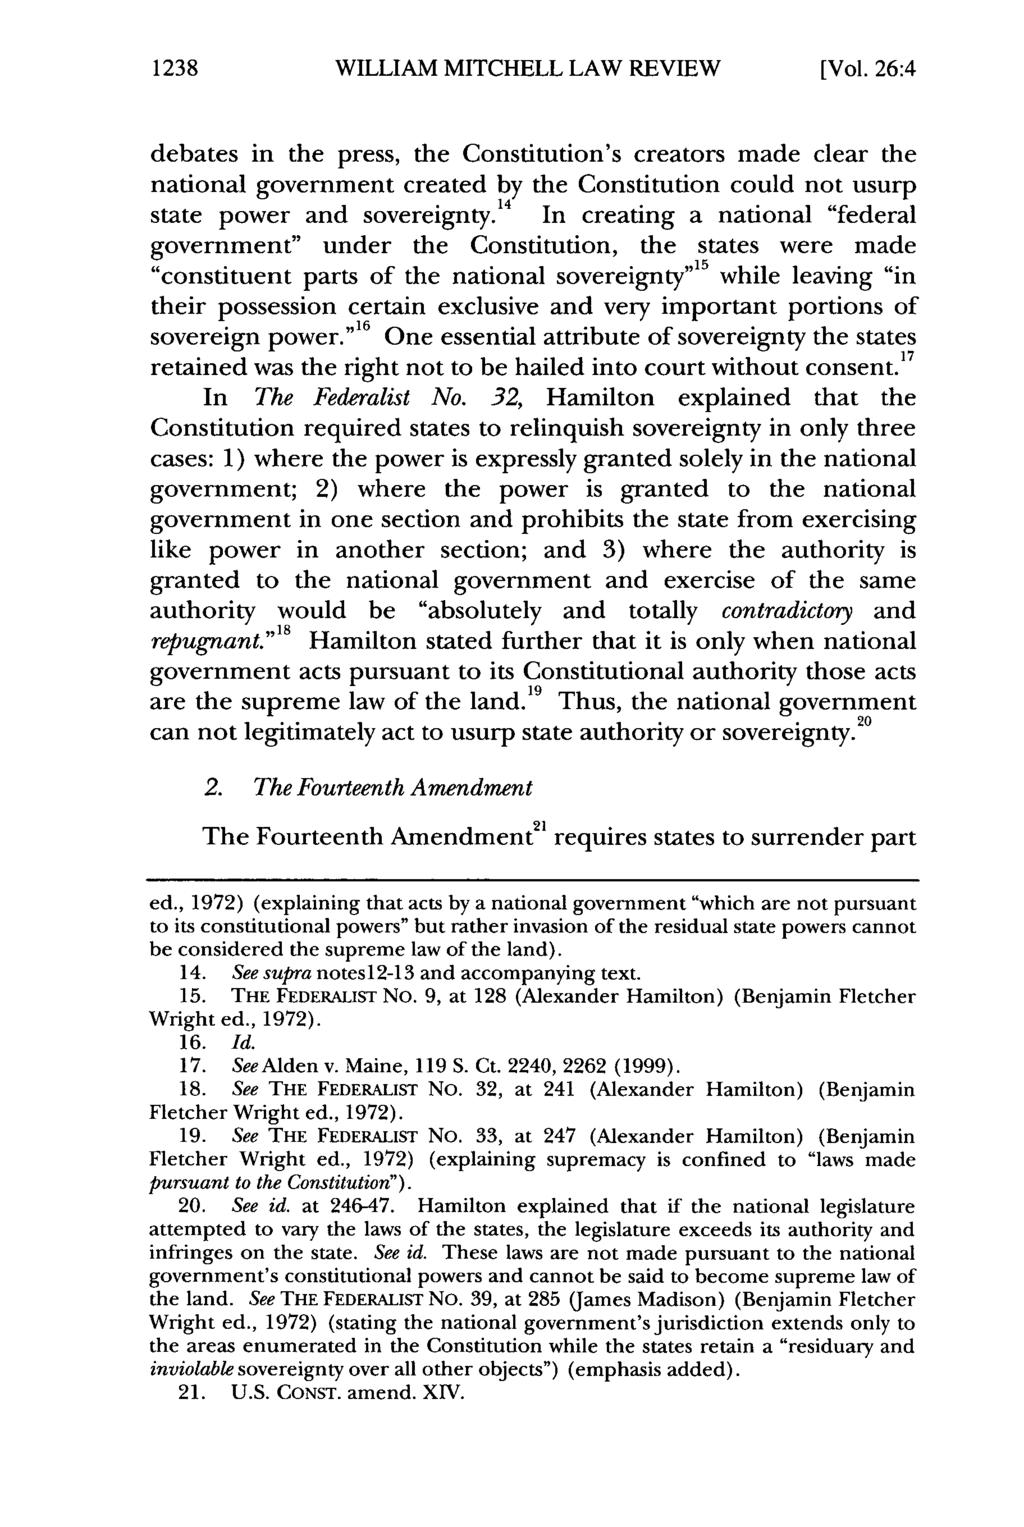 1238 William WILLIAM Mitchell Law MITCHELL Review, Vol. 26, LAW Iss. 4 [2000], REVIEW Art. 12 [Vol.